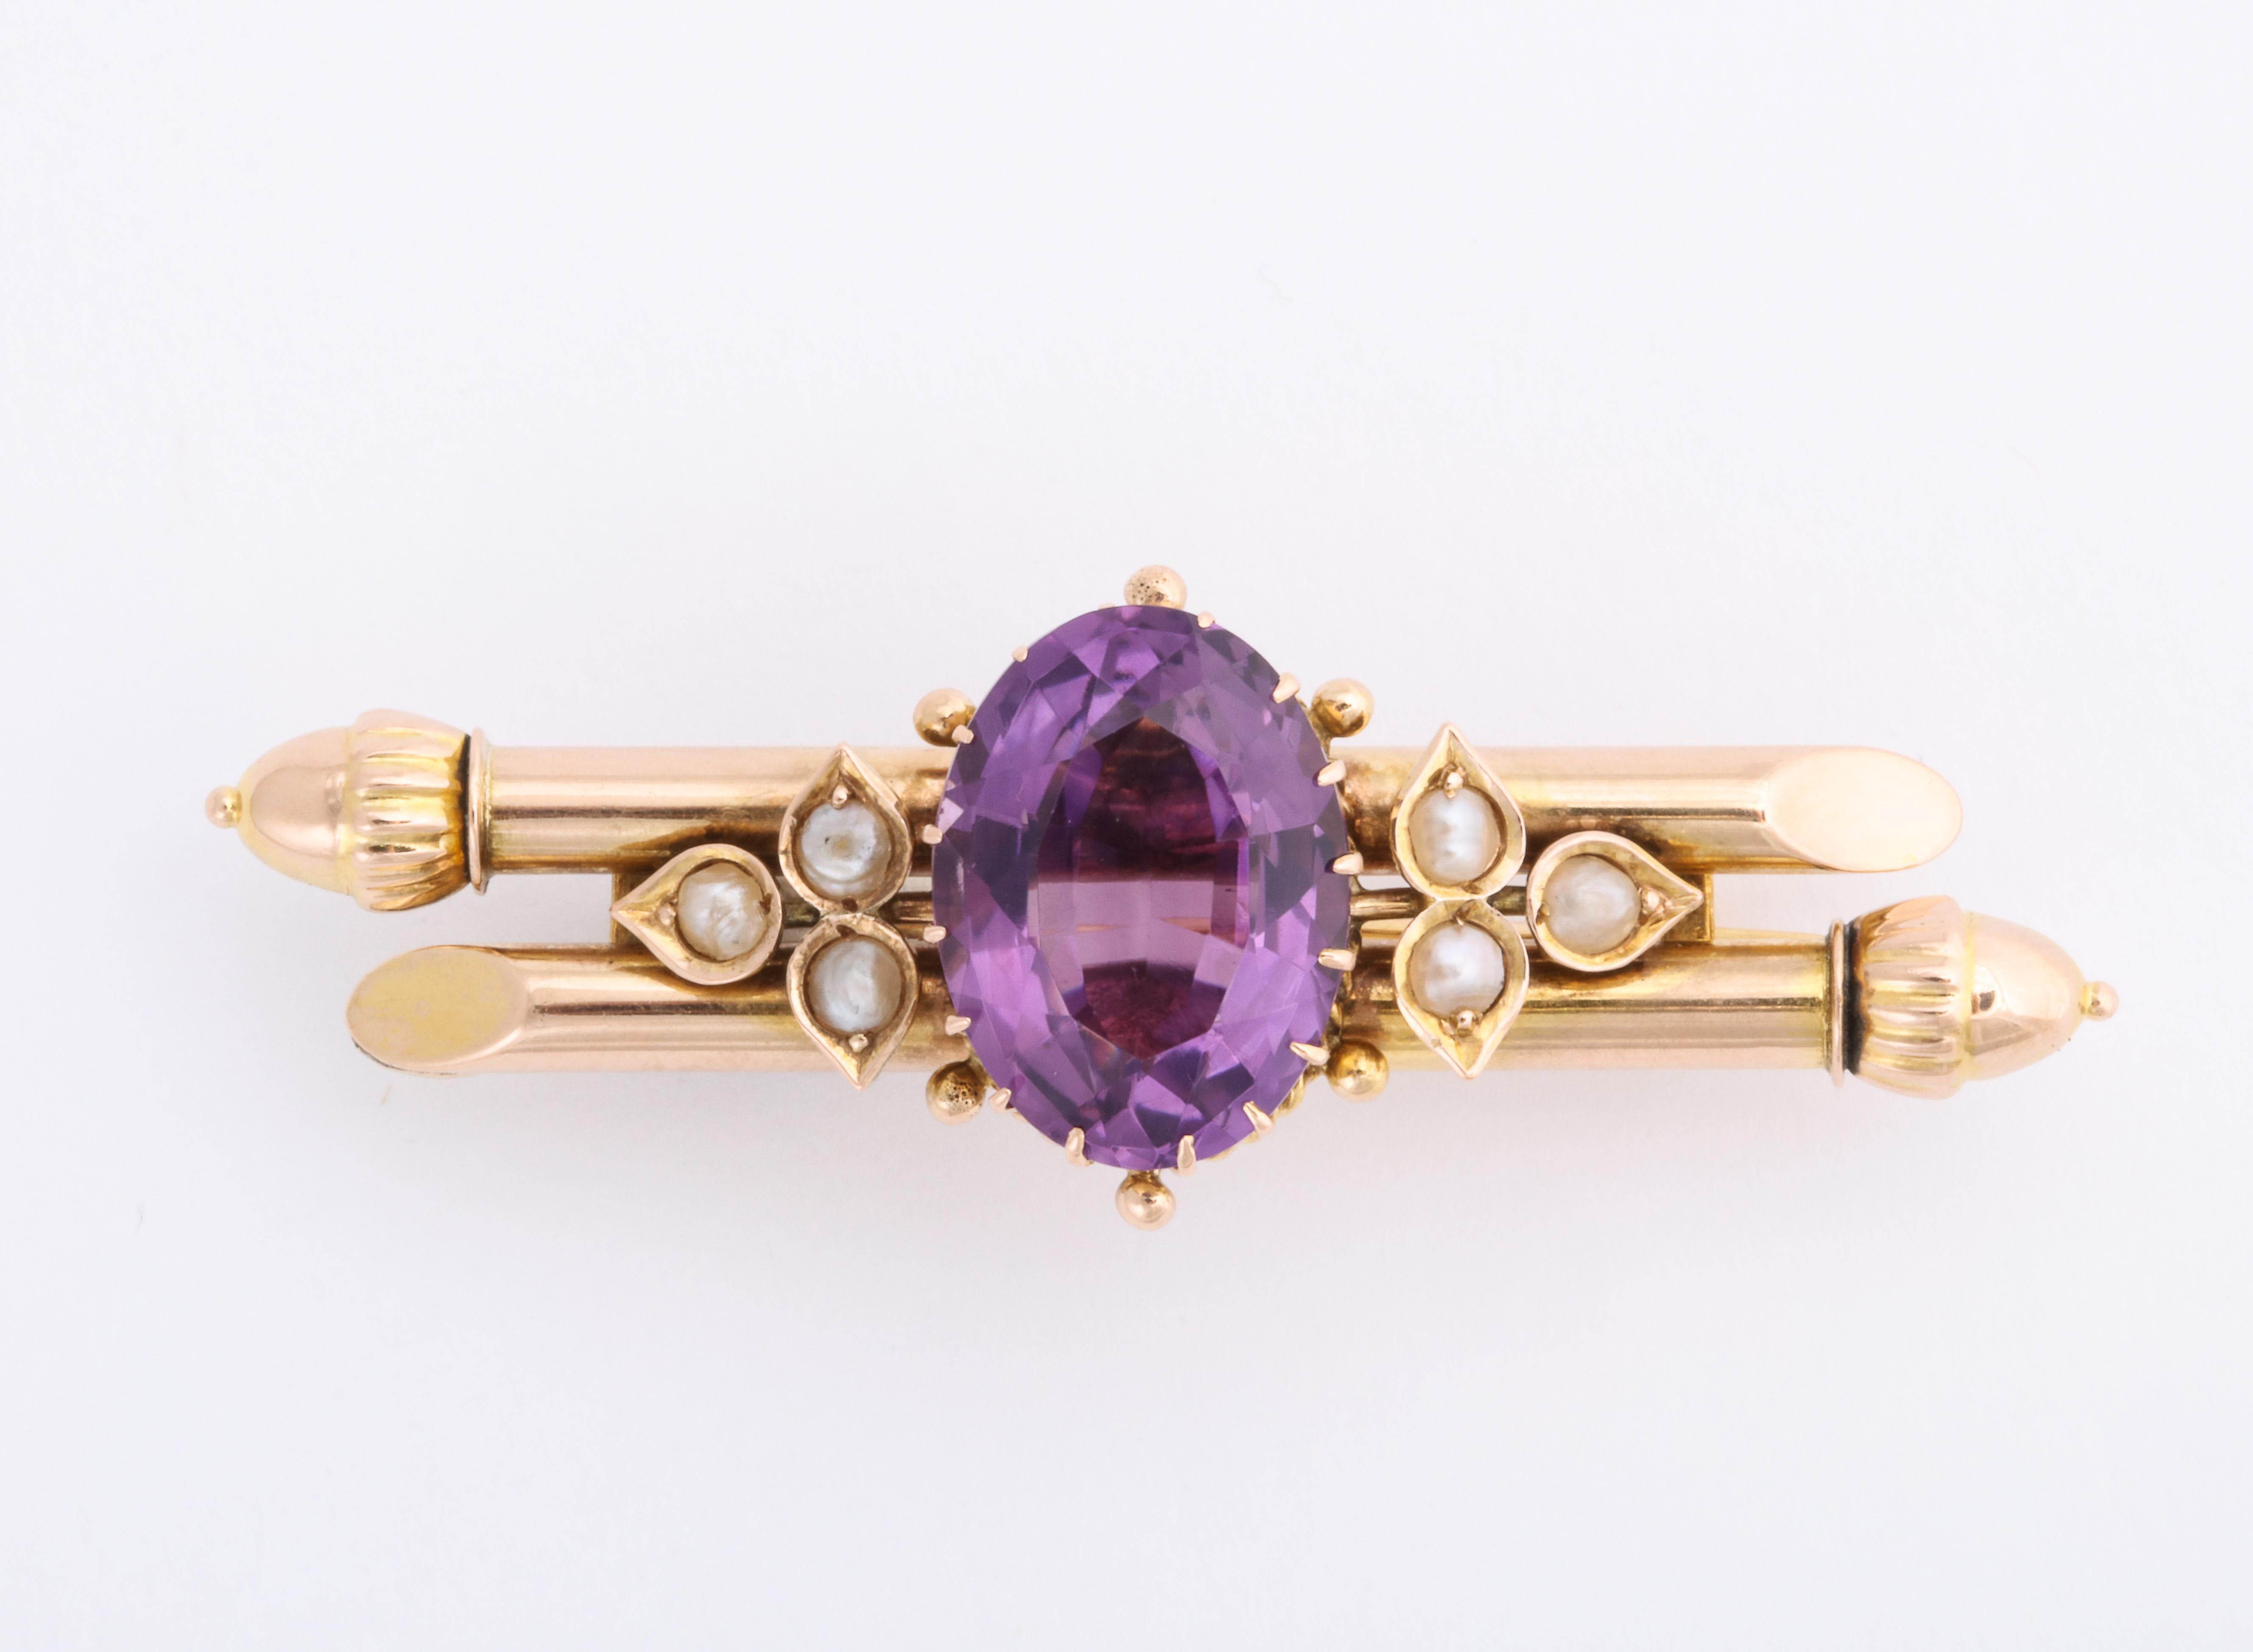 Women's or Men's Russian Gold Amethyst and Pearl Pin, circa 1900